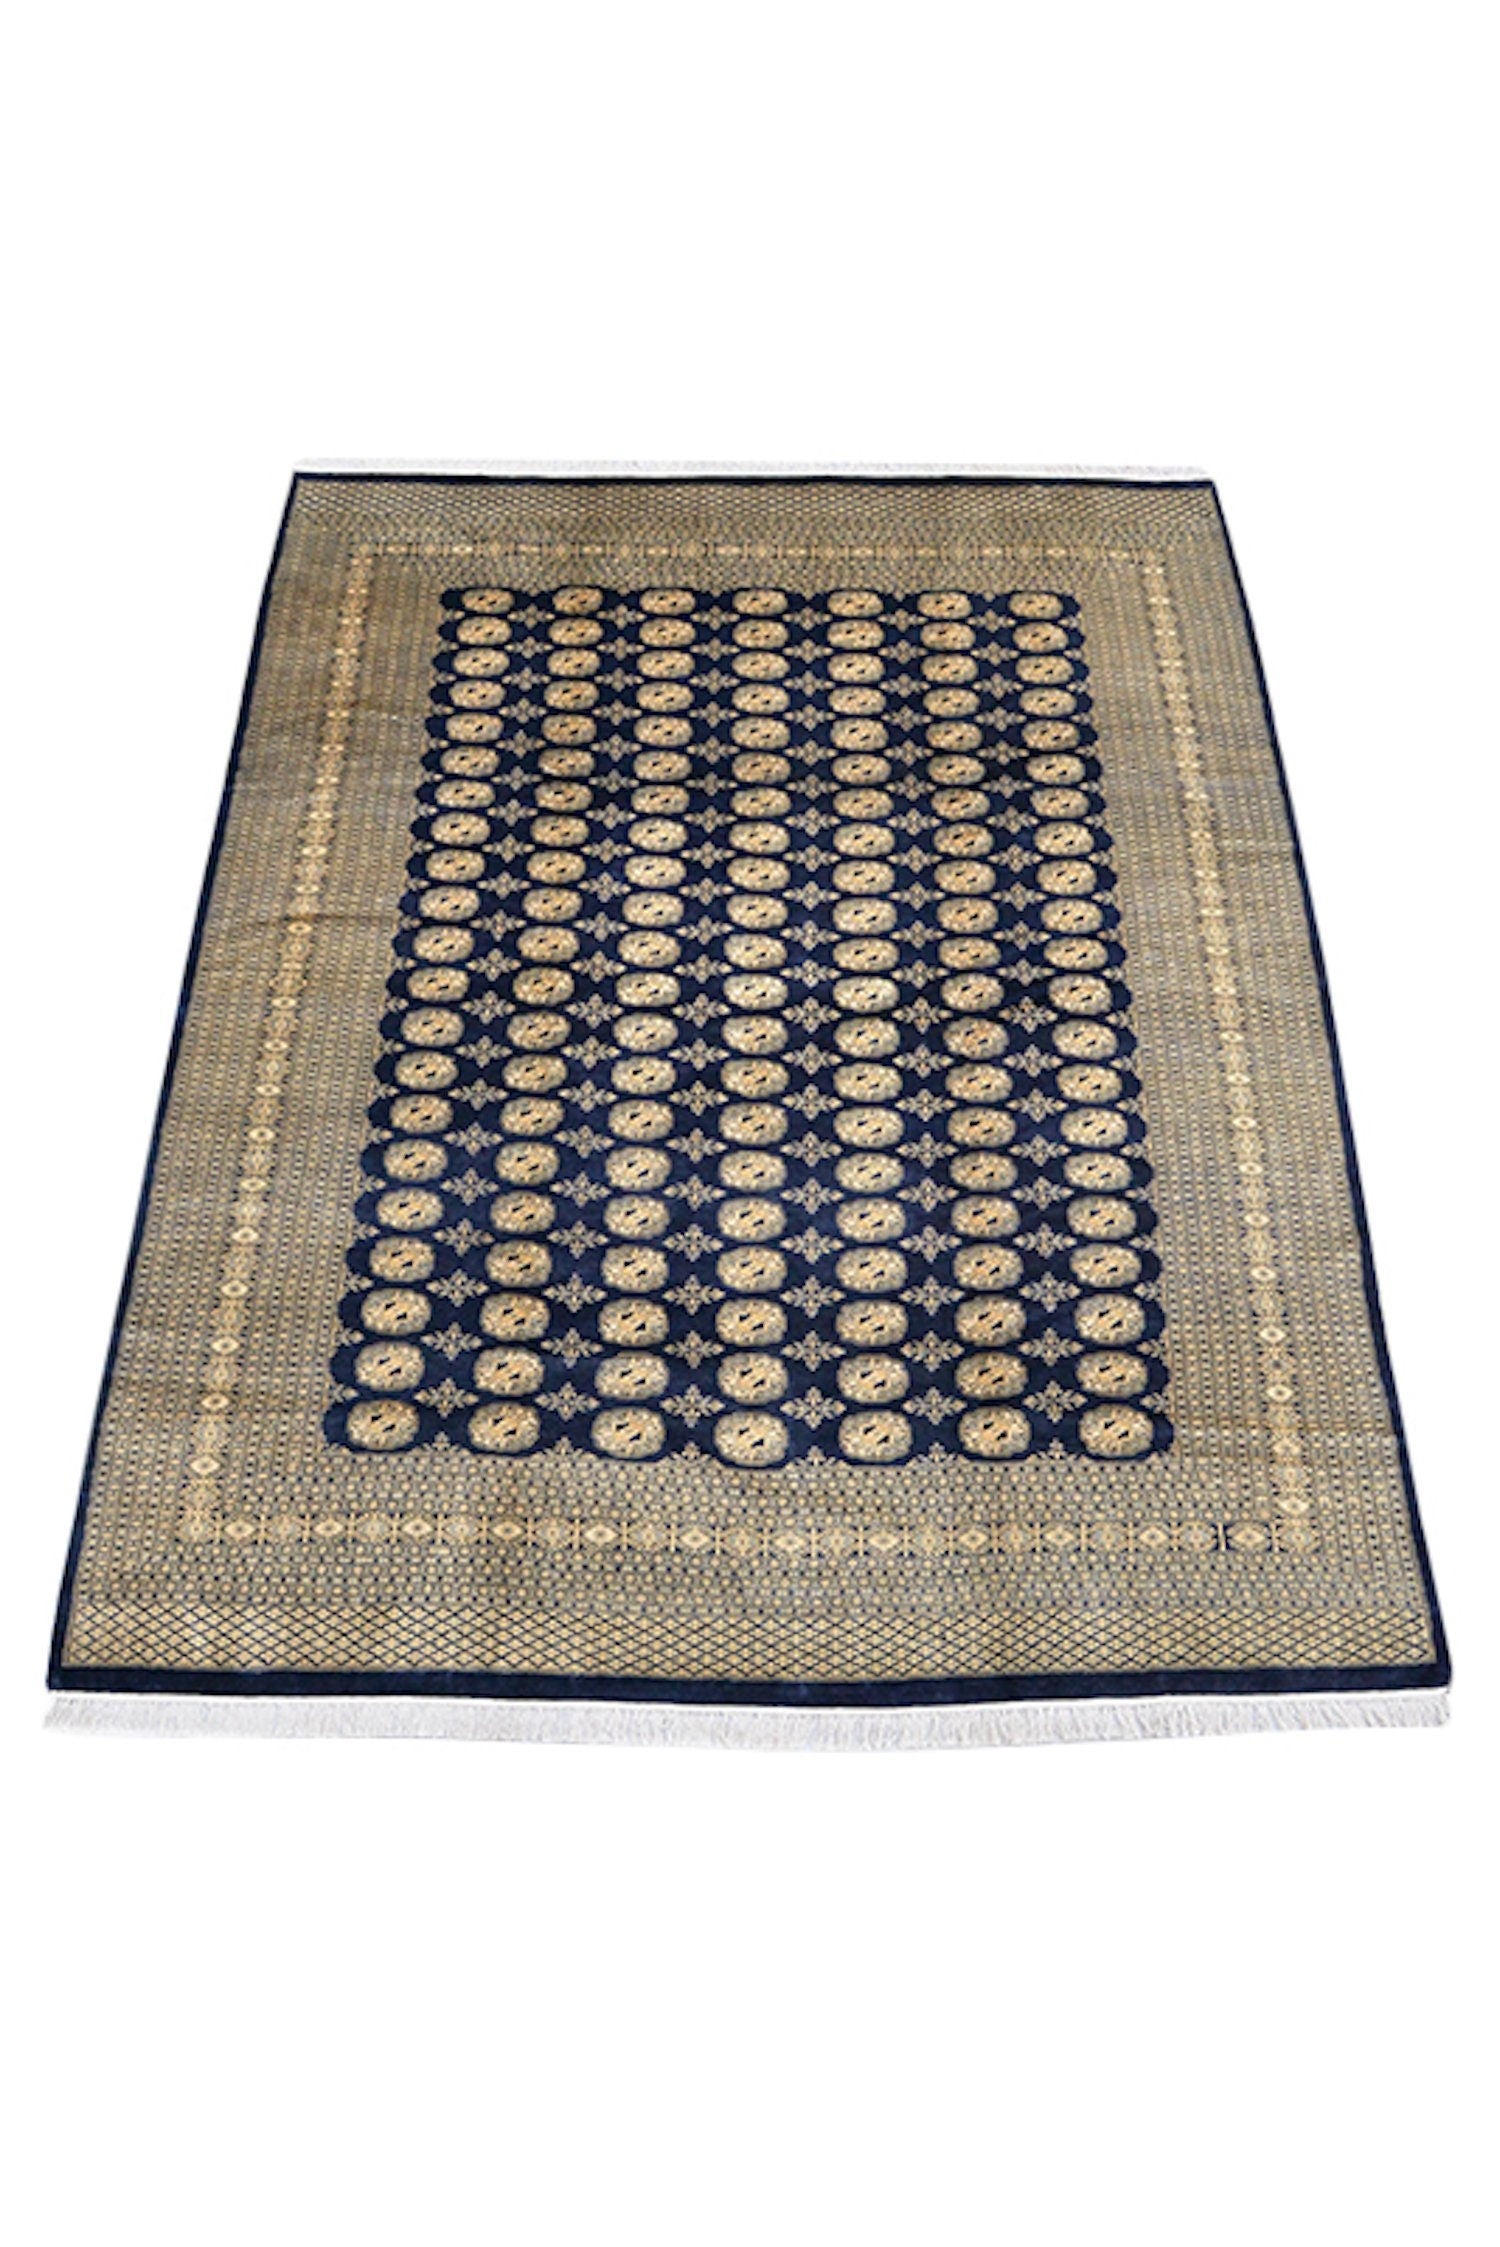 Navy Yellow Antique Rug, 8x10 Ft, Oriental Classic Rug, Large Bordered Traditional Rug, Wool Handwoven